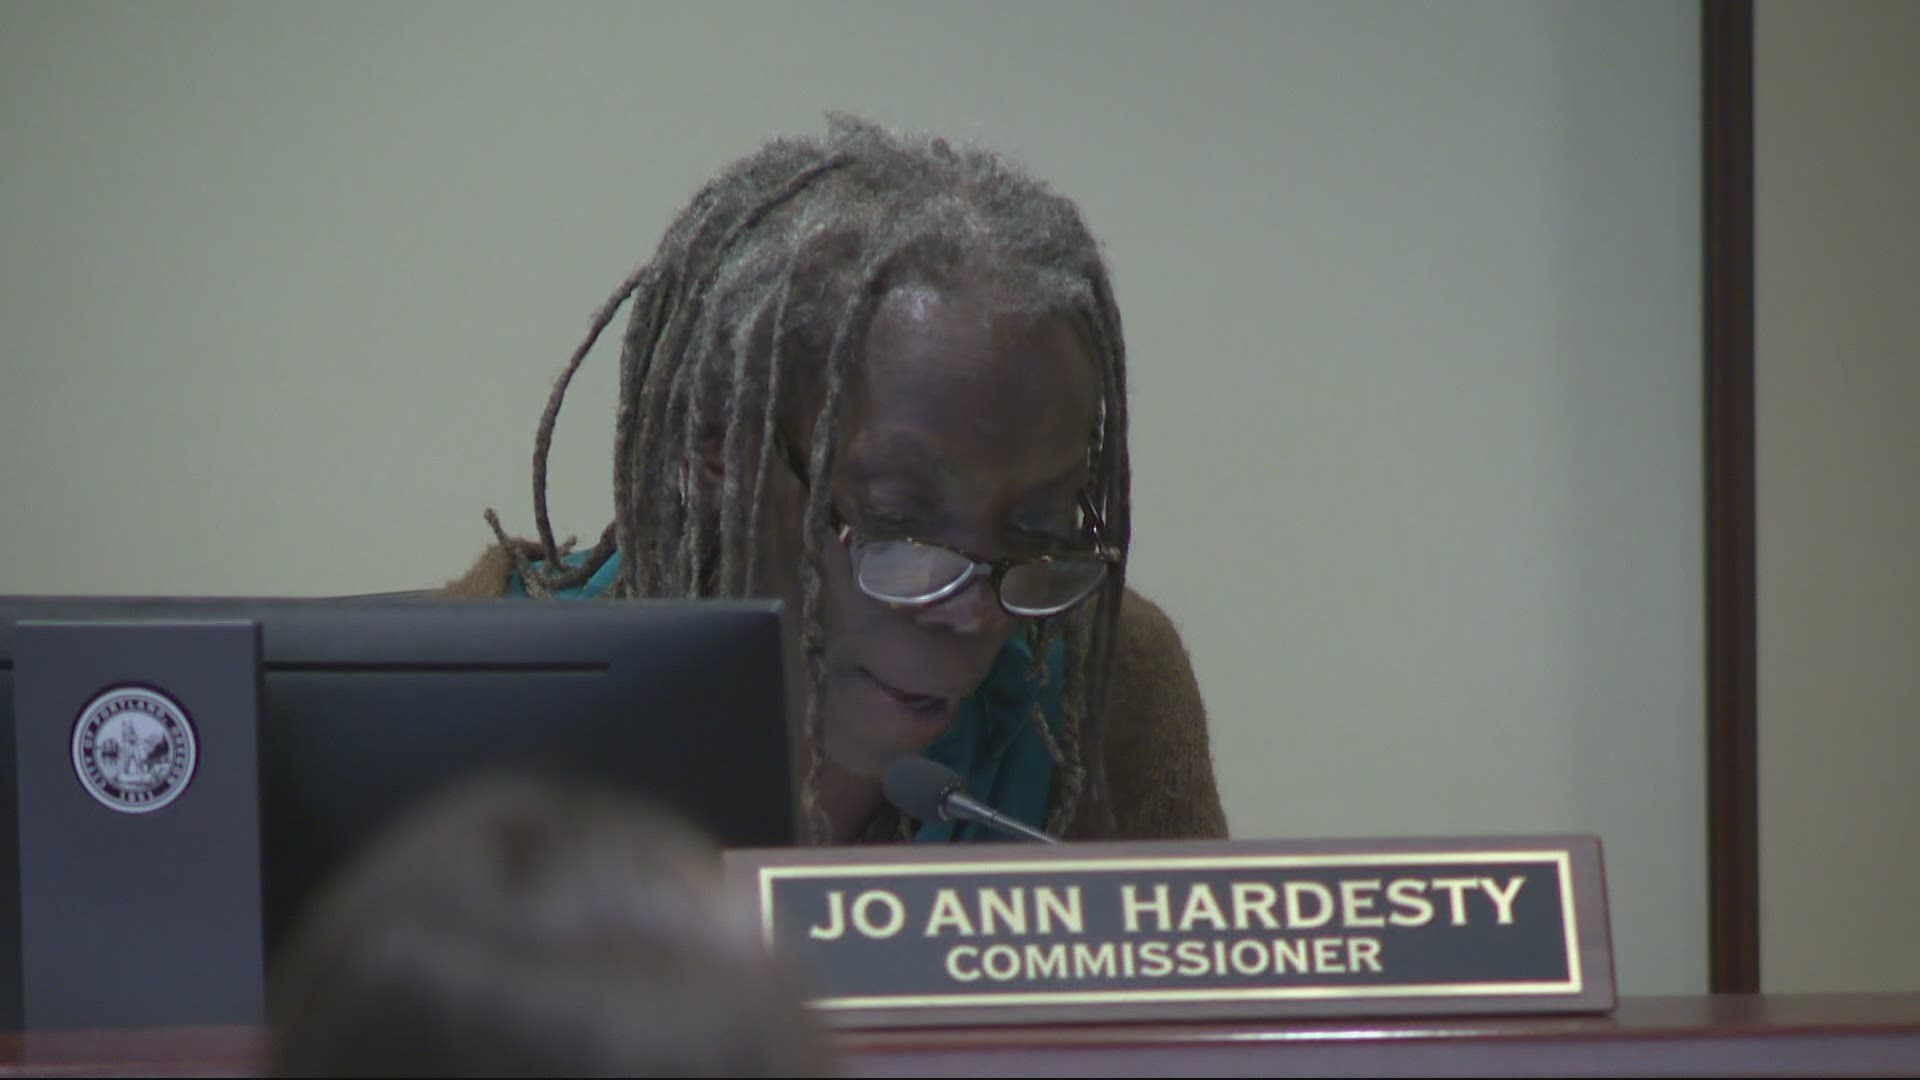 “What happened to Commissioner Hardesty is wrong and unacceptable,” Mayor Ted Wheeler said Friday. “It’s a reflection of broader systemic racism."